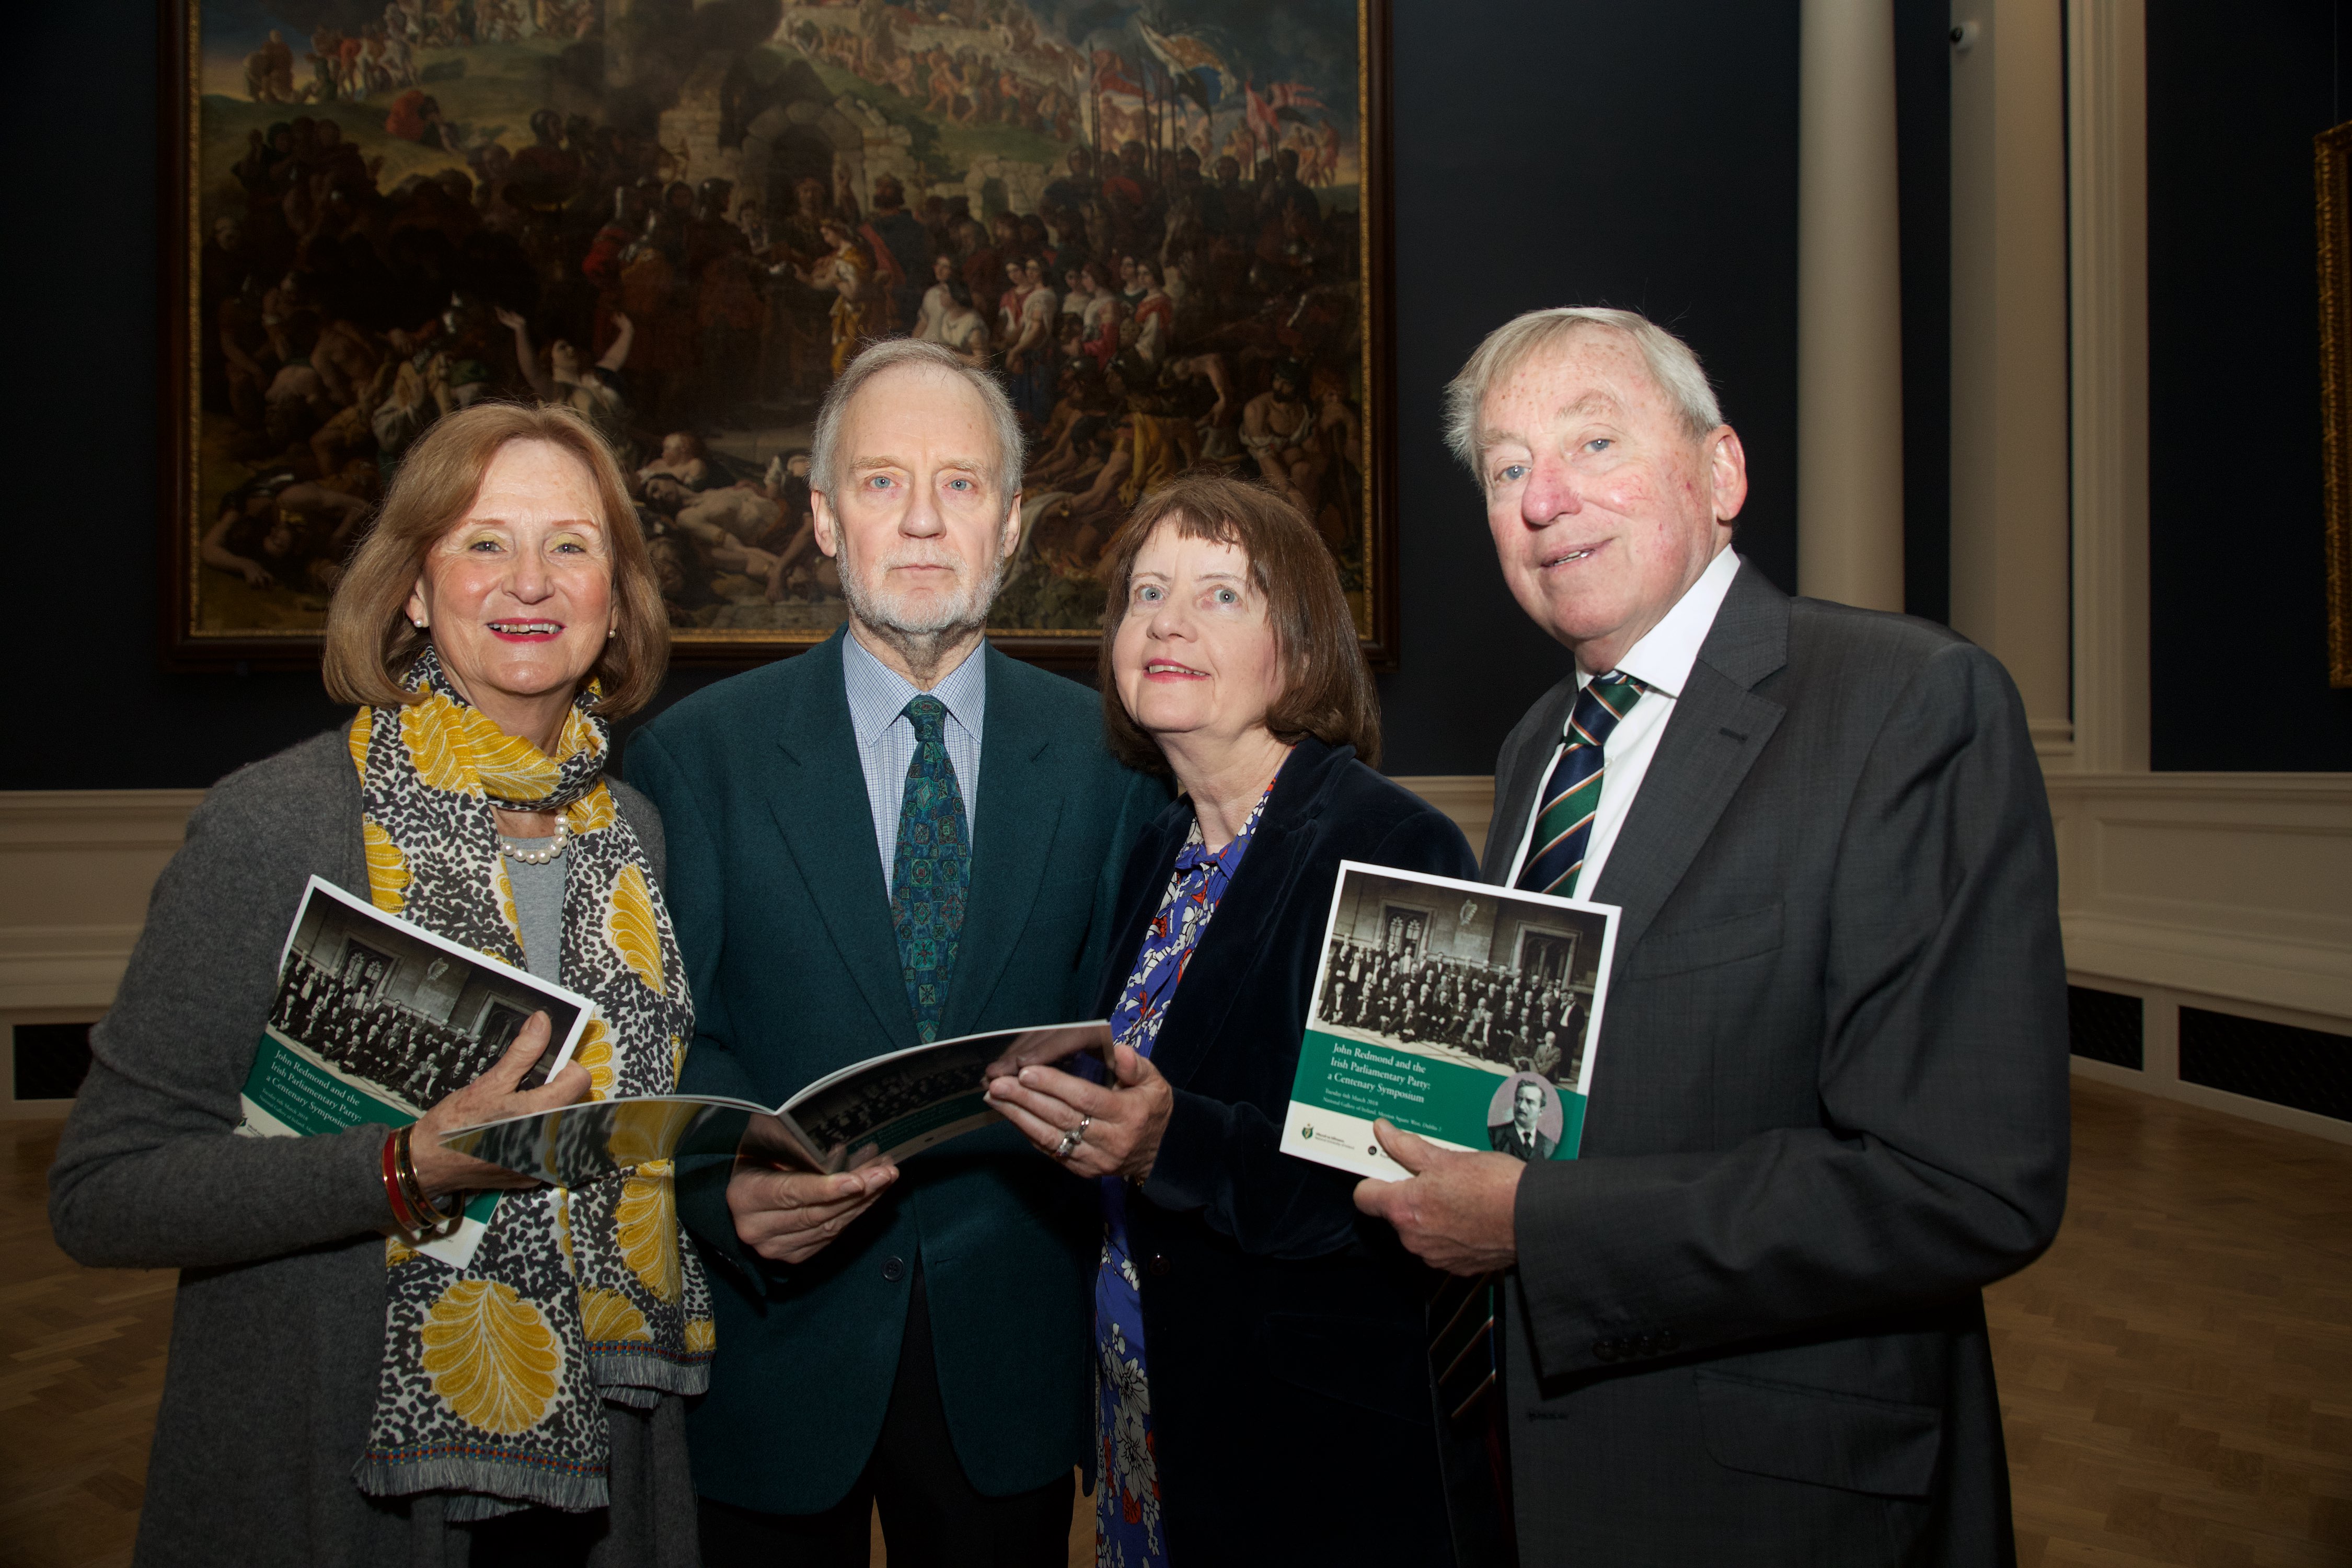 Barbara Lockyer, John Green and Mary Green, great-granchildren of John Redmond, pictured with Dr Maurice Manning, Chancellor of NUI.